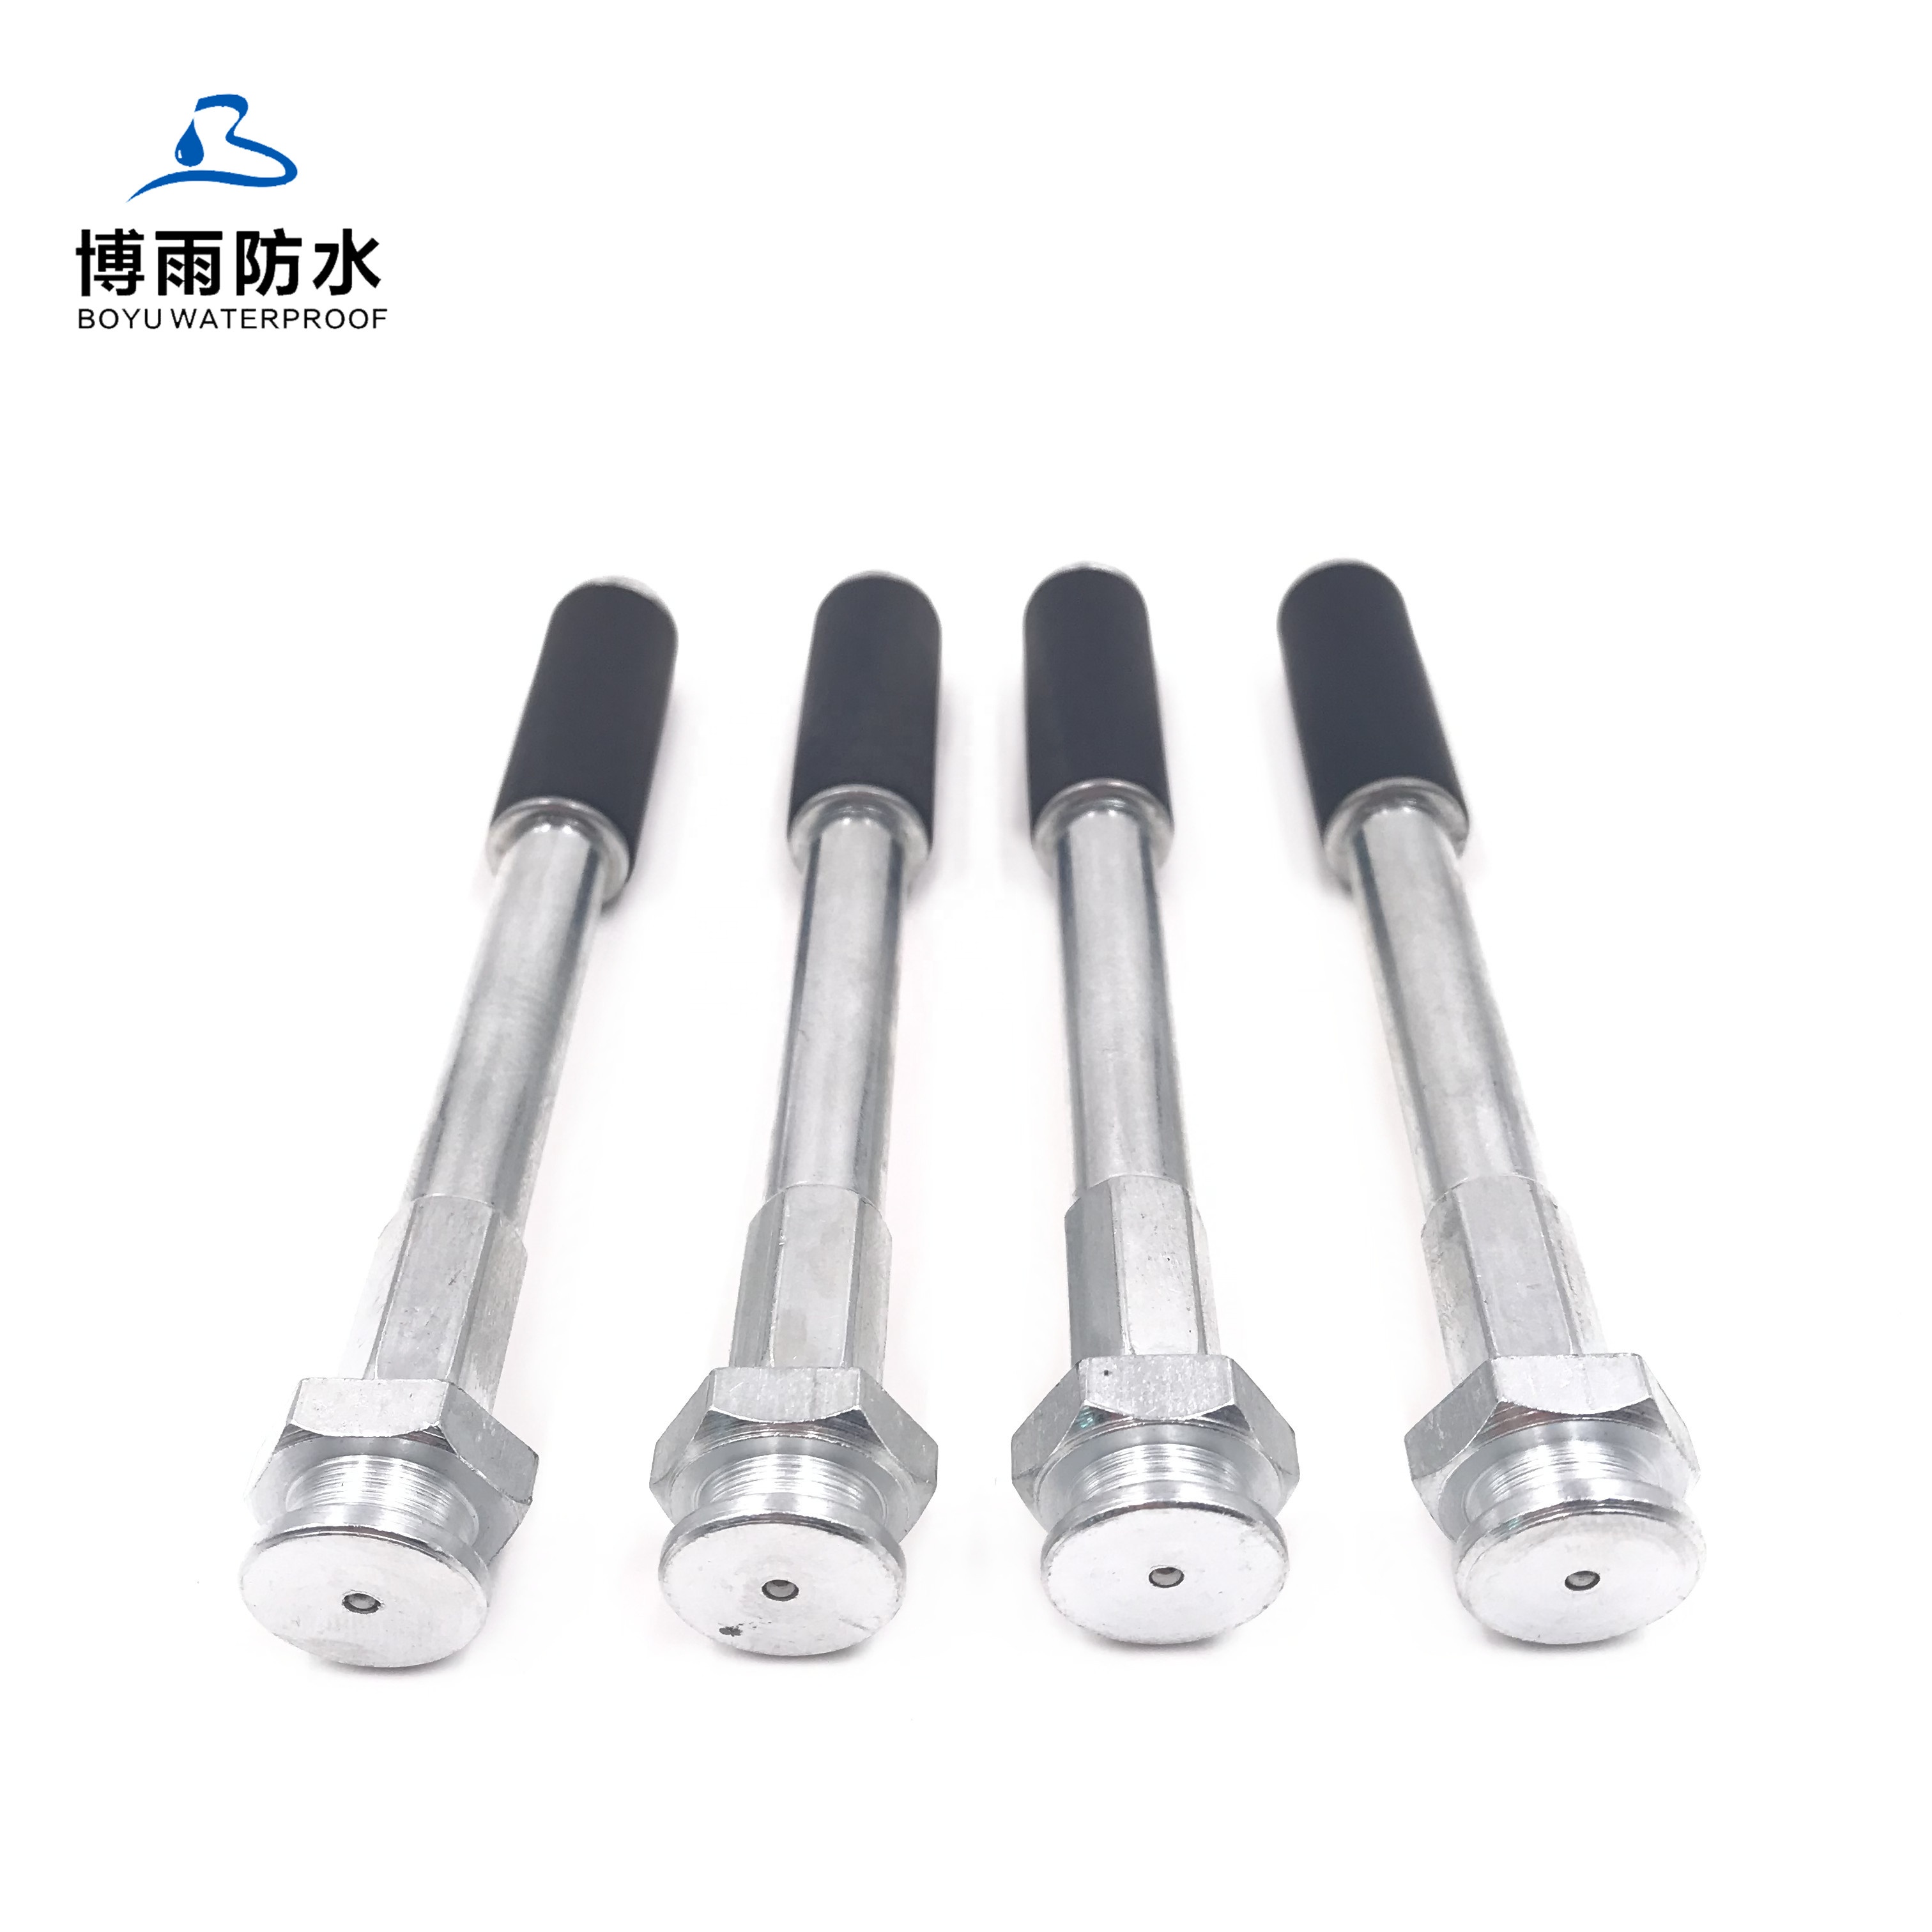 OEM/ODM Supplier Injection Packers Ports - Flat Head nipple M6 Injection Packers steel 13*100mm China factory customize design – Boyu